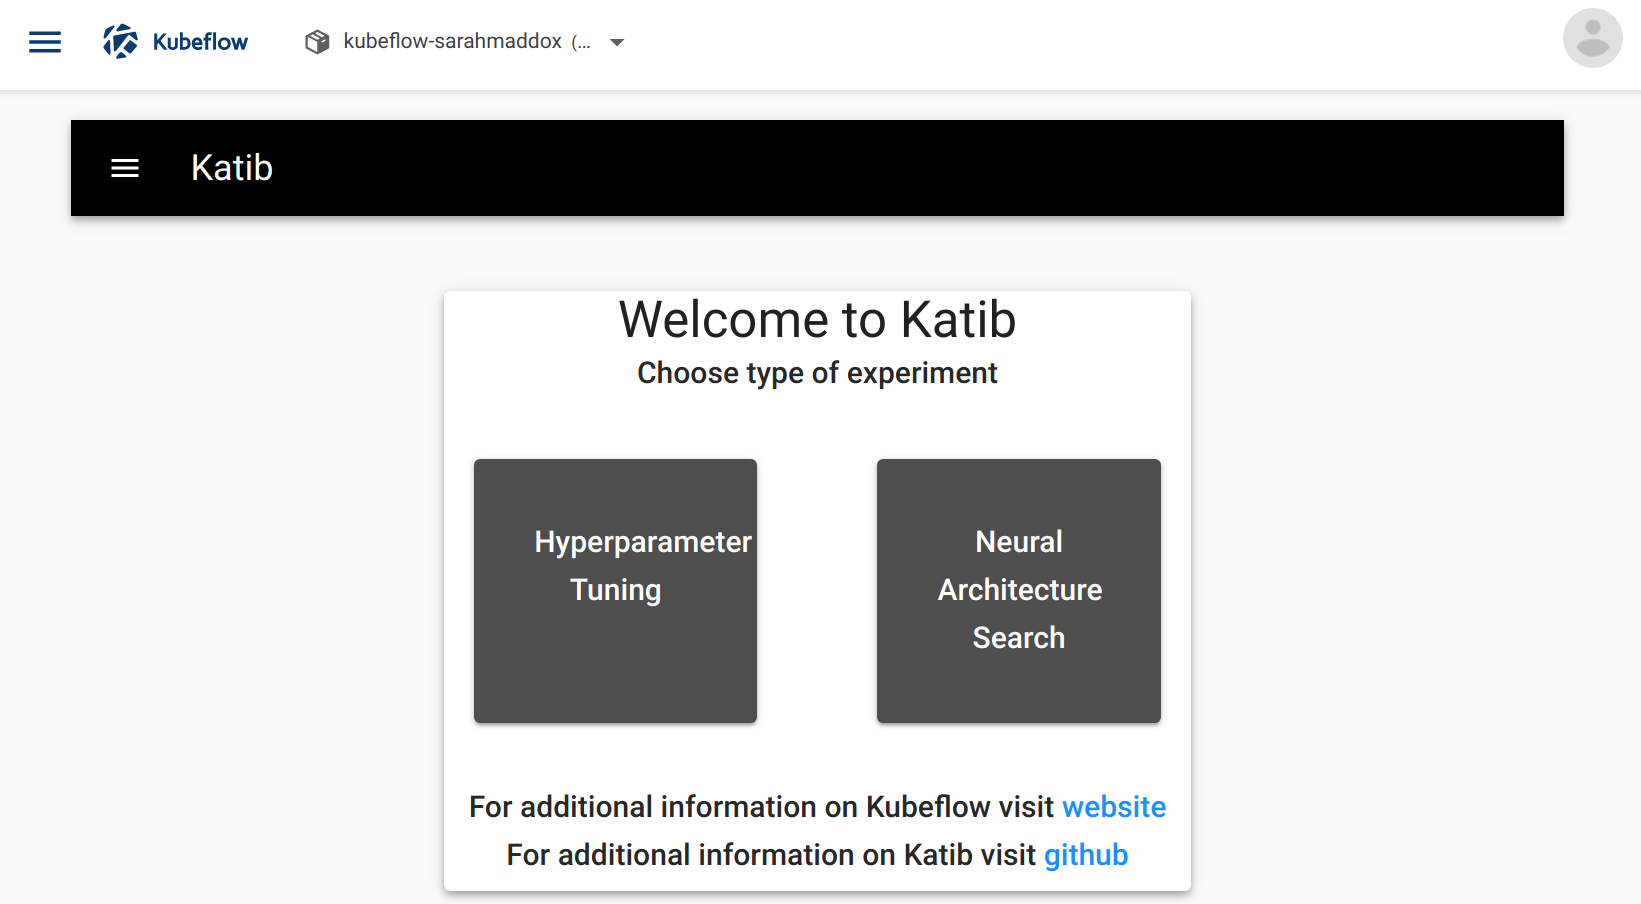 The Katib home page within the Kubeflow UI